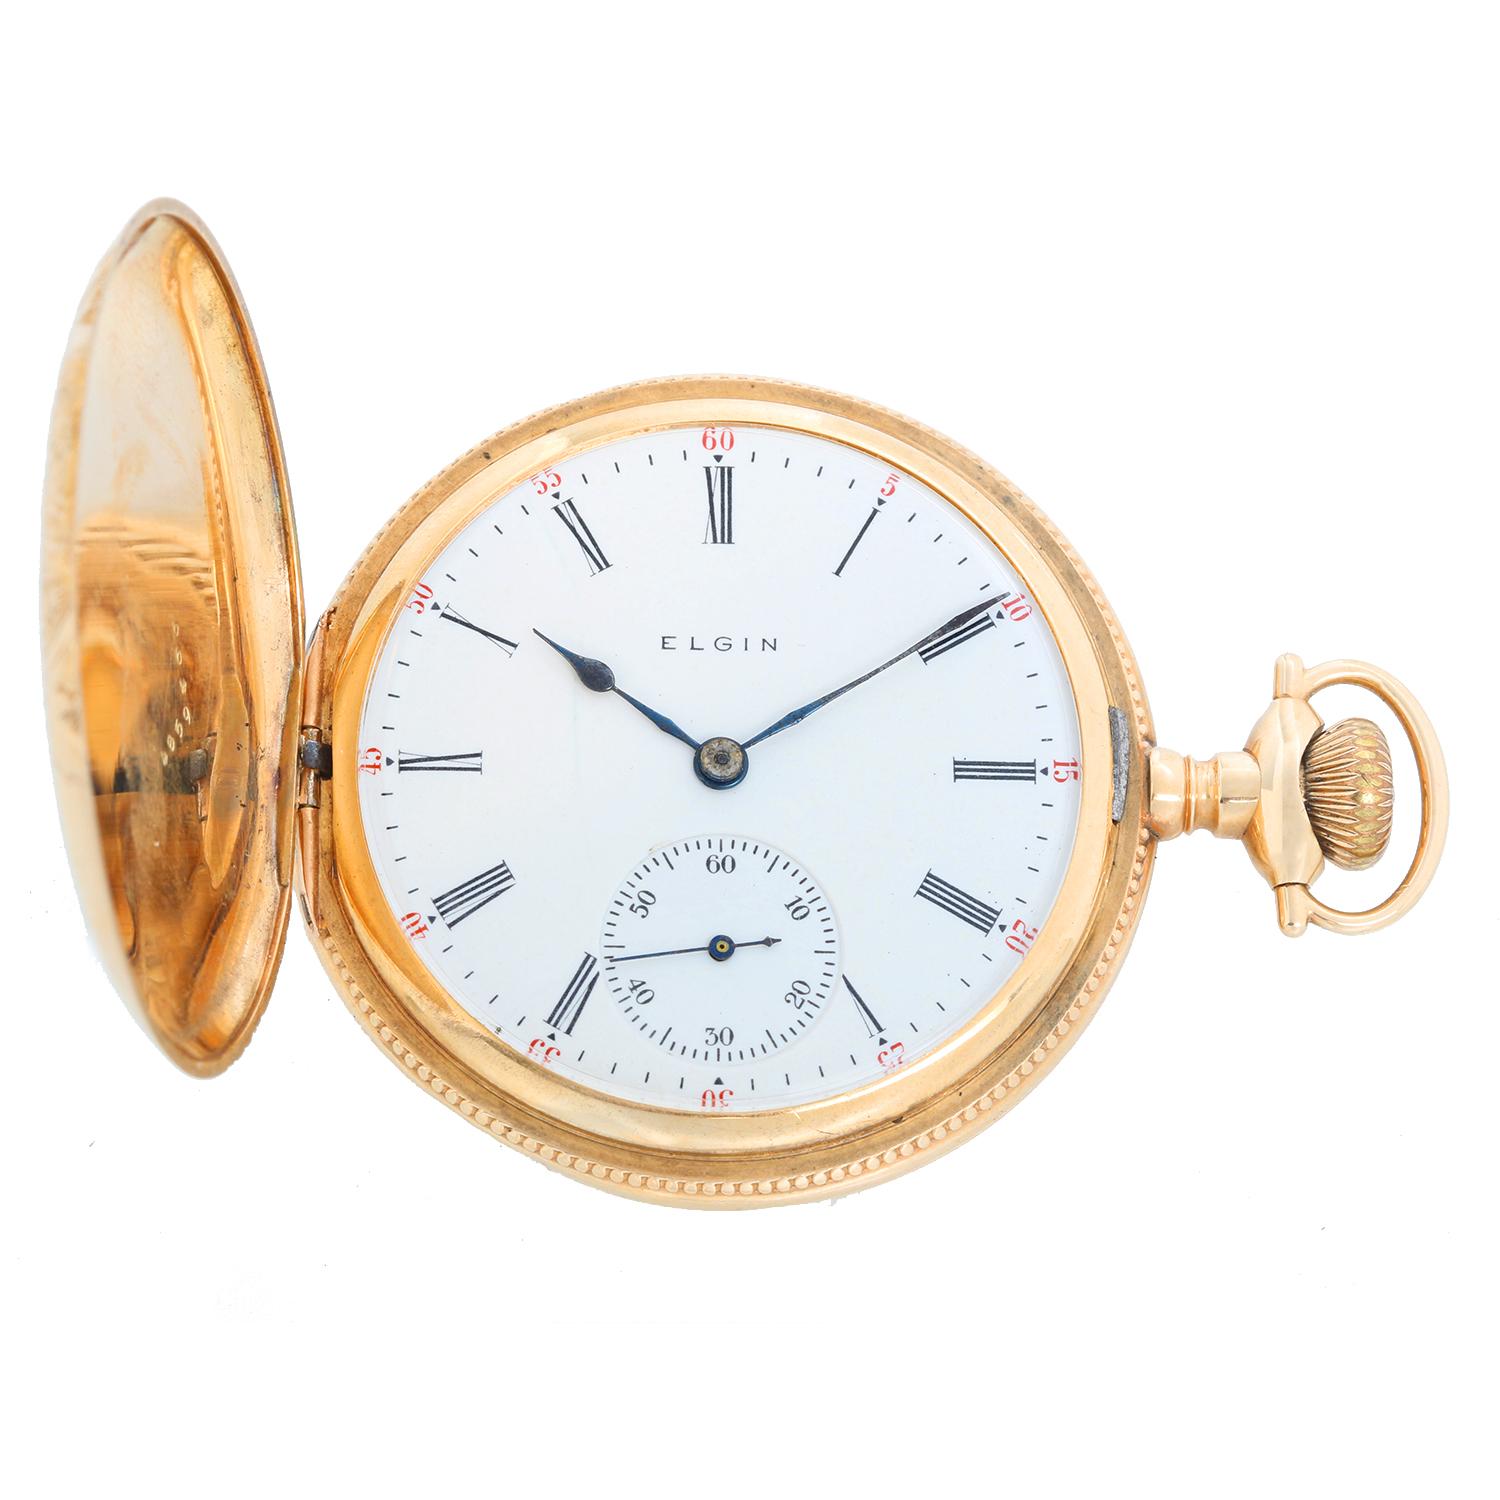 Vintage Elgin 14K Yellow Gold  165 Pocket Watch - Manual winding. 14K yellow gold hunter case with flower engraving ( 50 mm ). White dial with Roman numerals. Pre-owned with custom box.